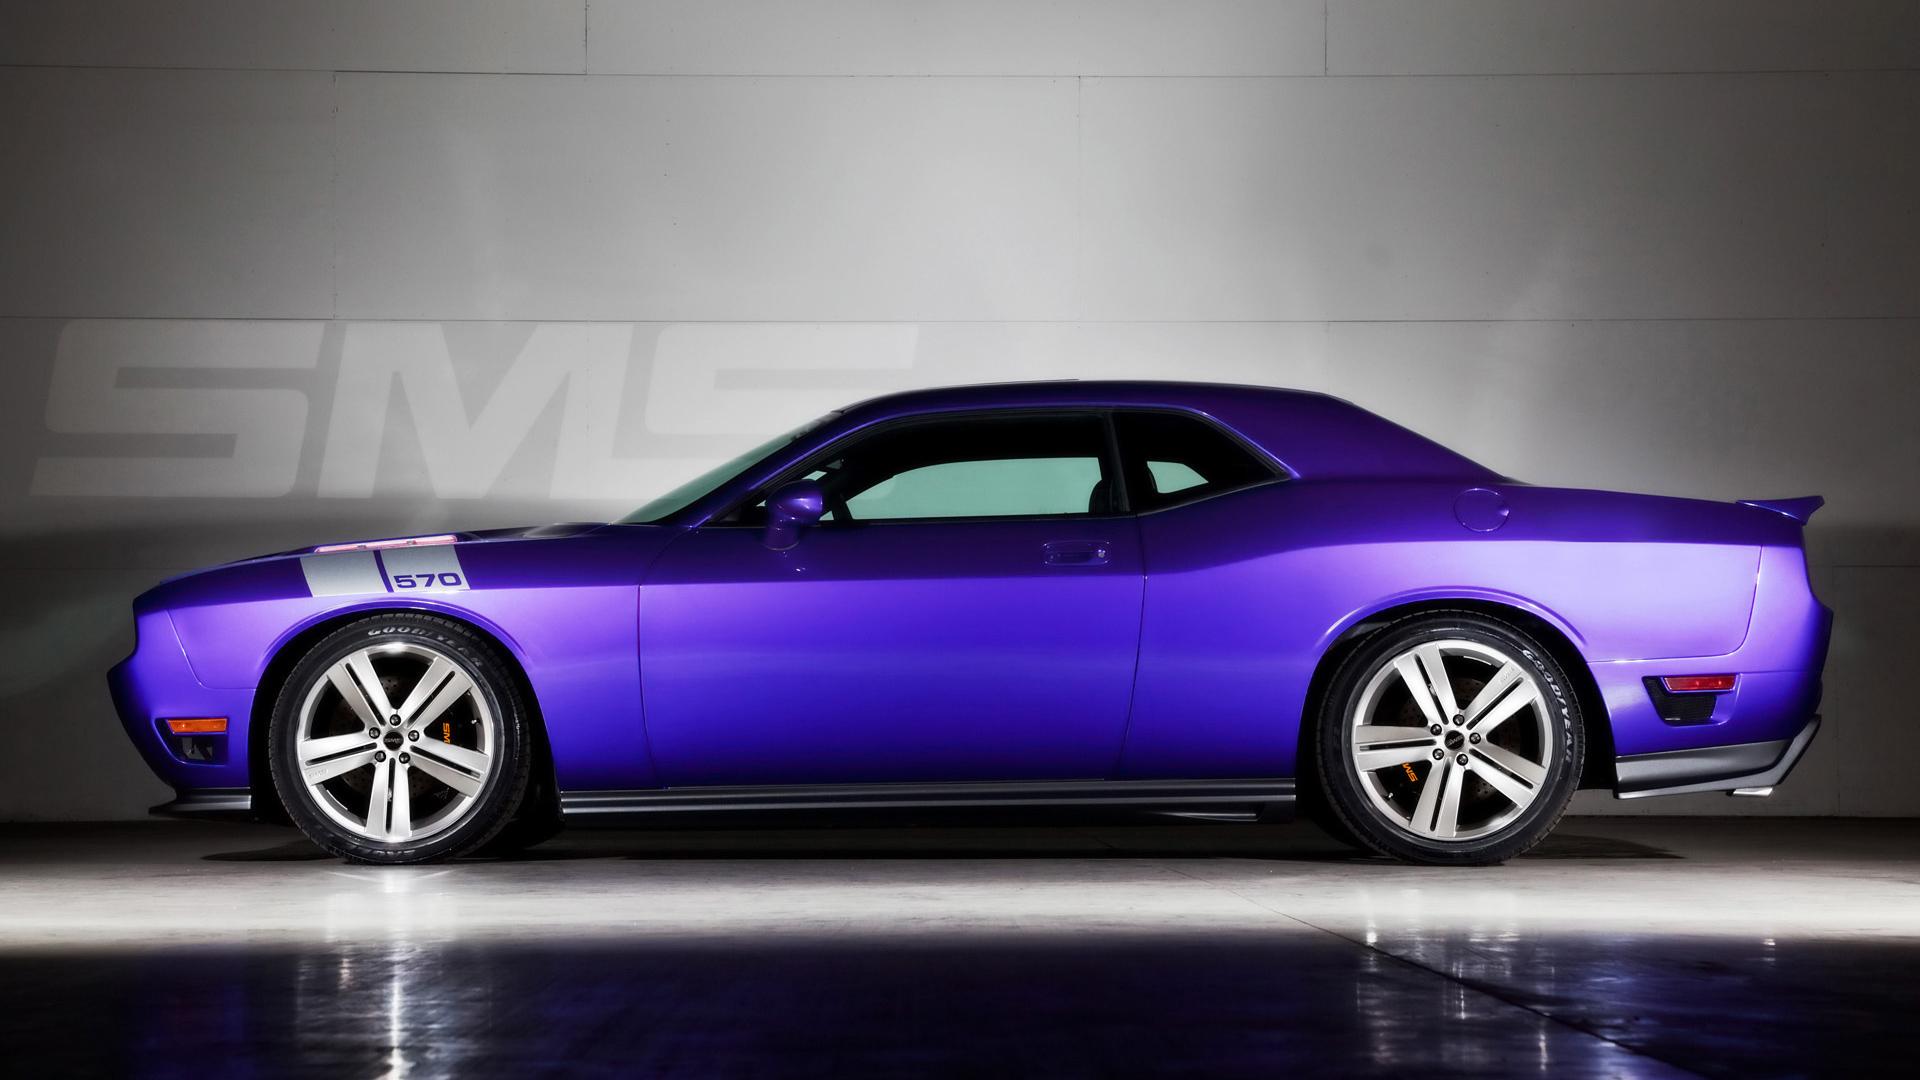 cars, muscle cars, vehicles, Dodge Challenger, Challenger, purple